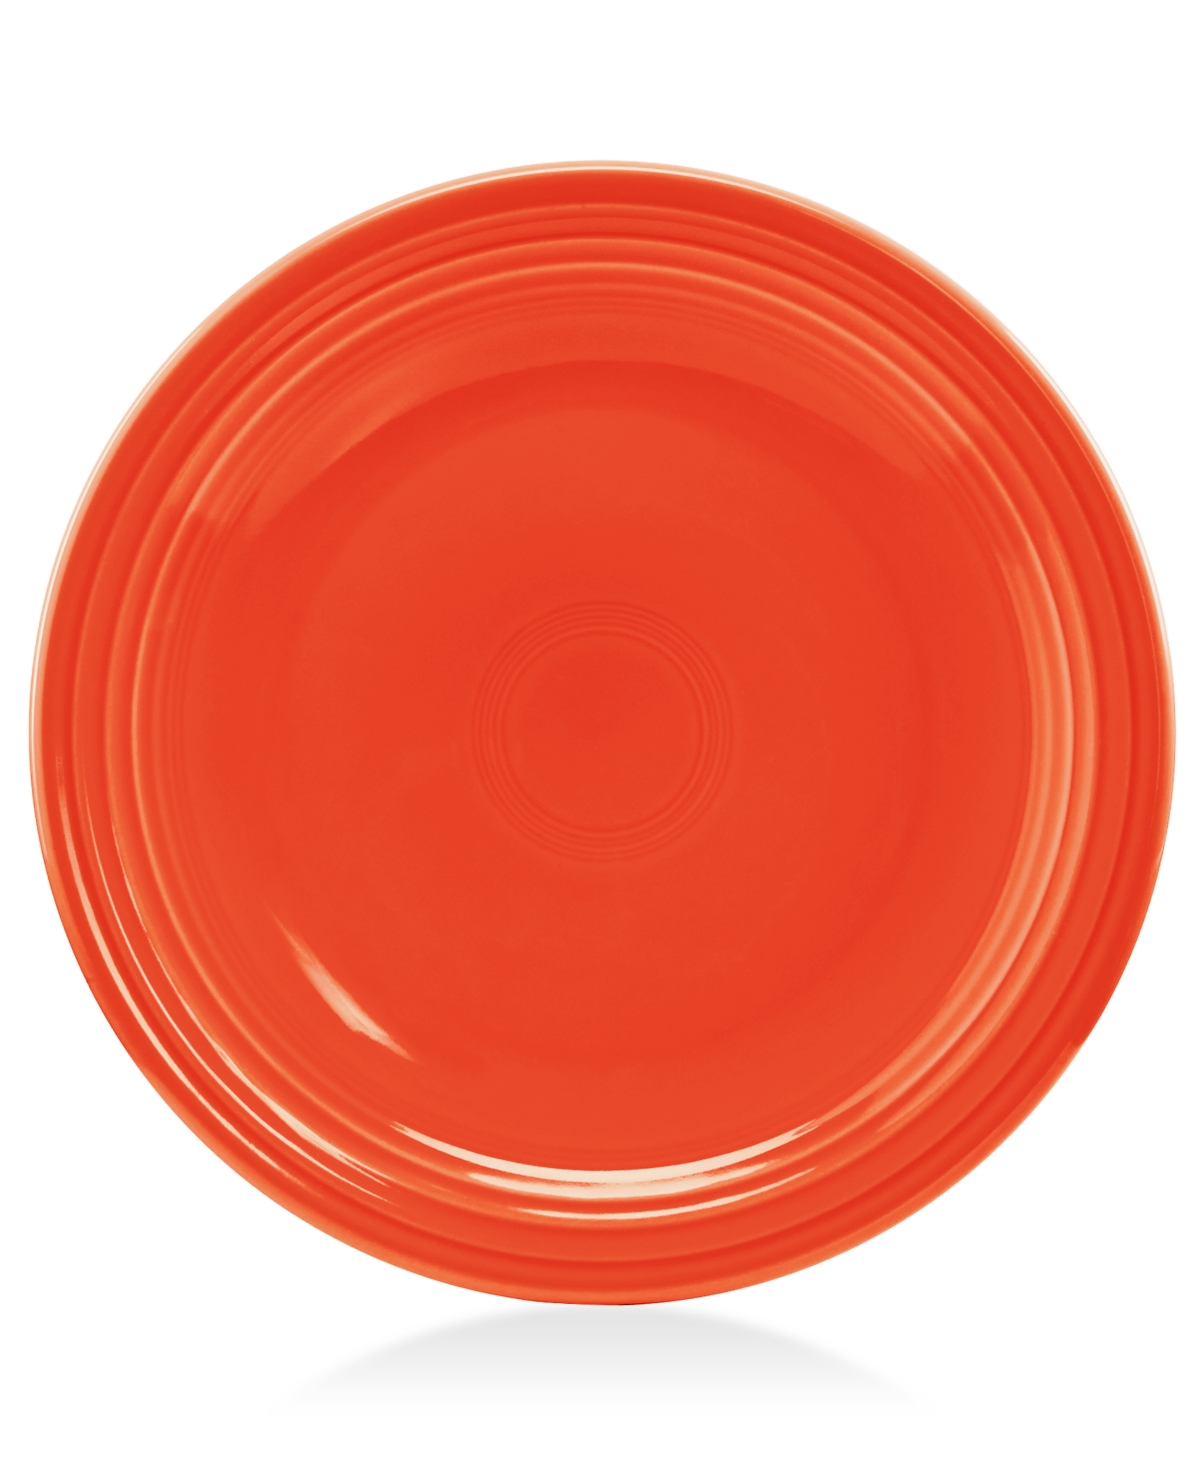 9" Luncheon Plate - Blue